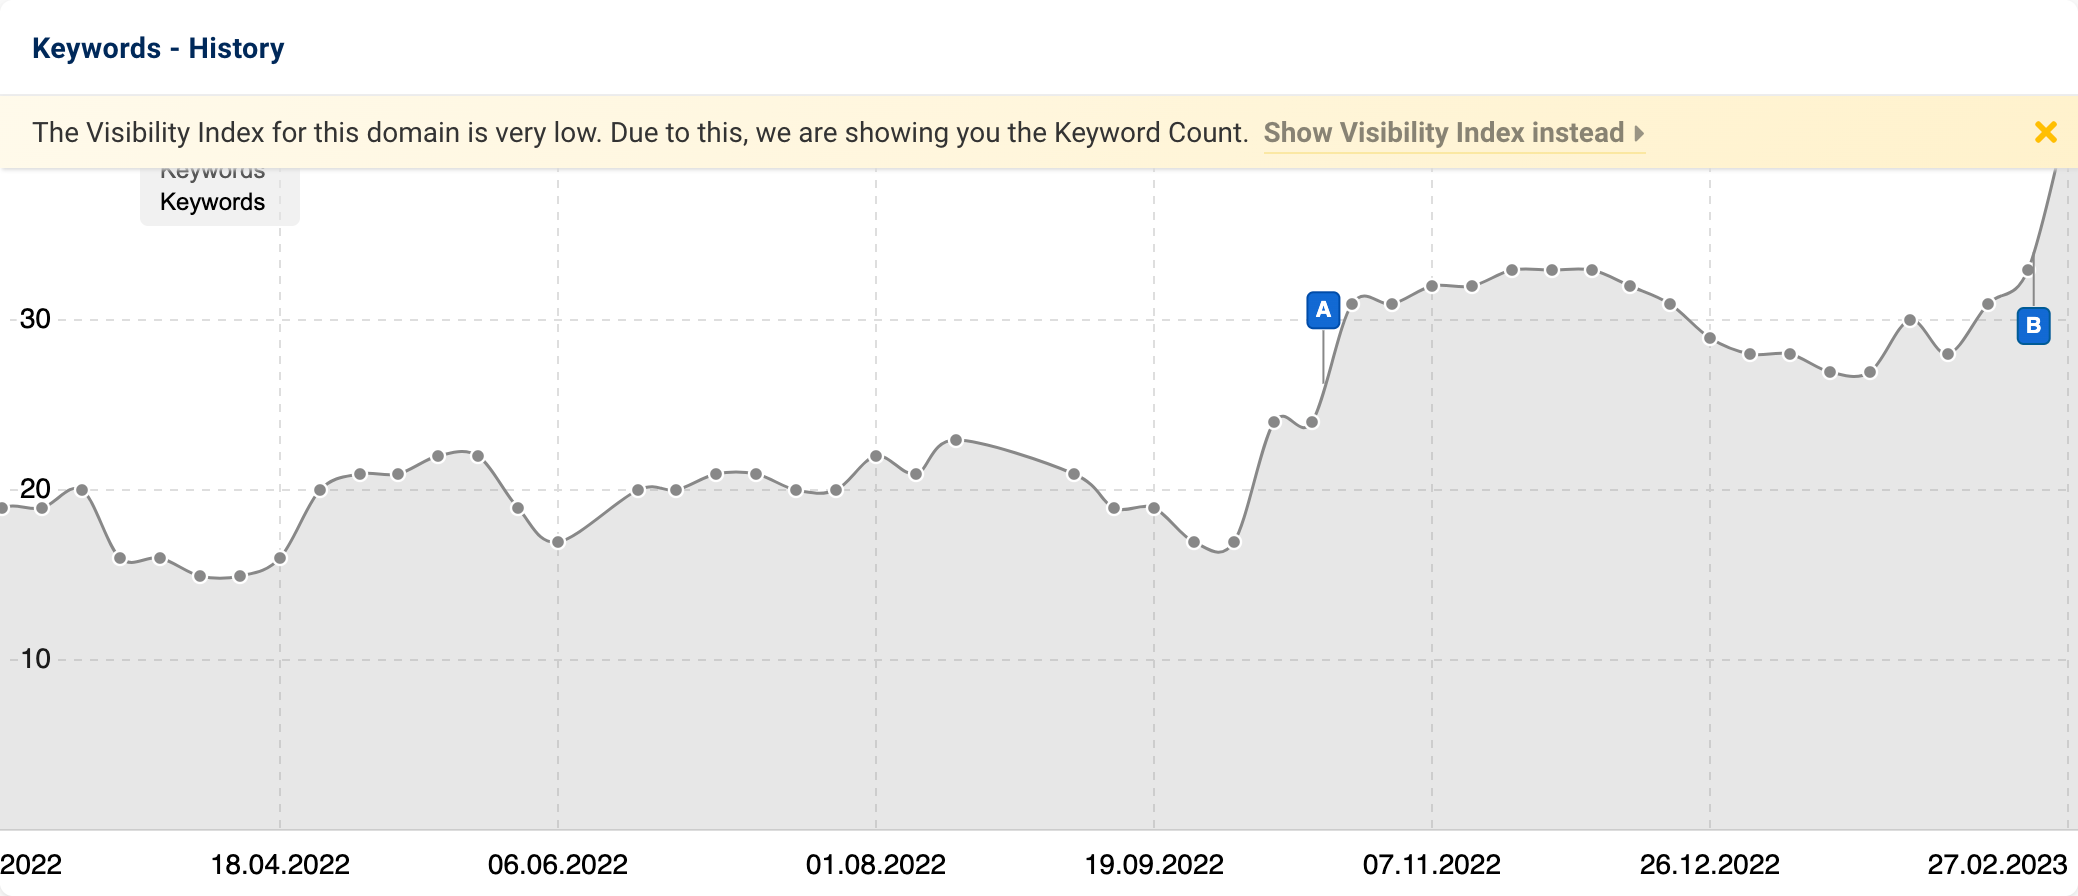 History of ranking keywords. This is shown if the Visibility Index of the domain is too low.